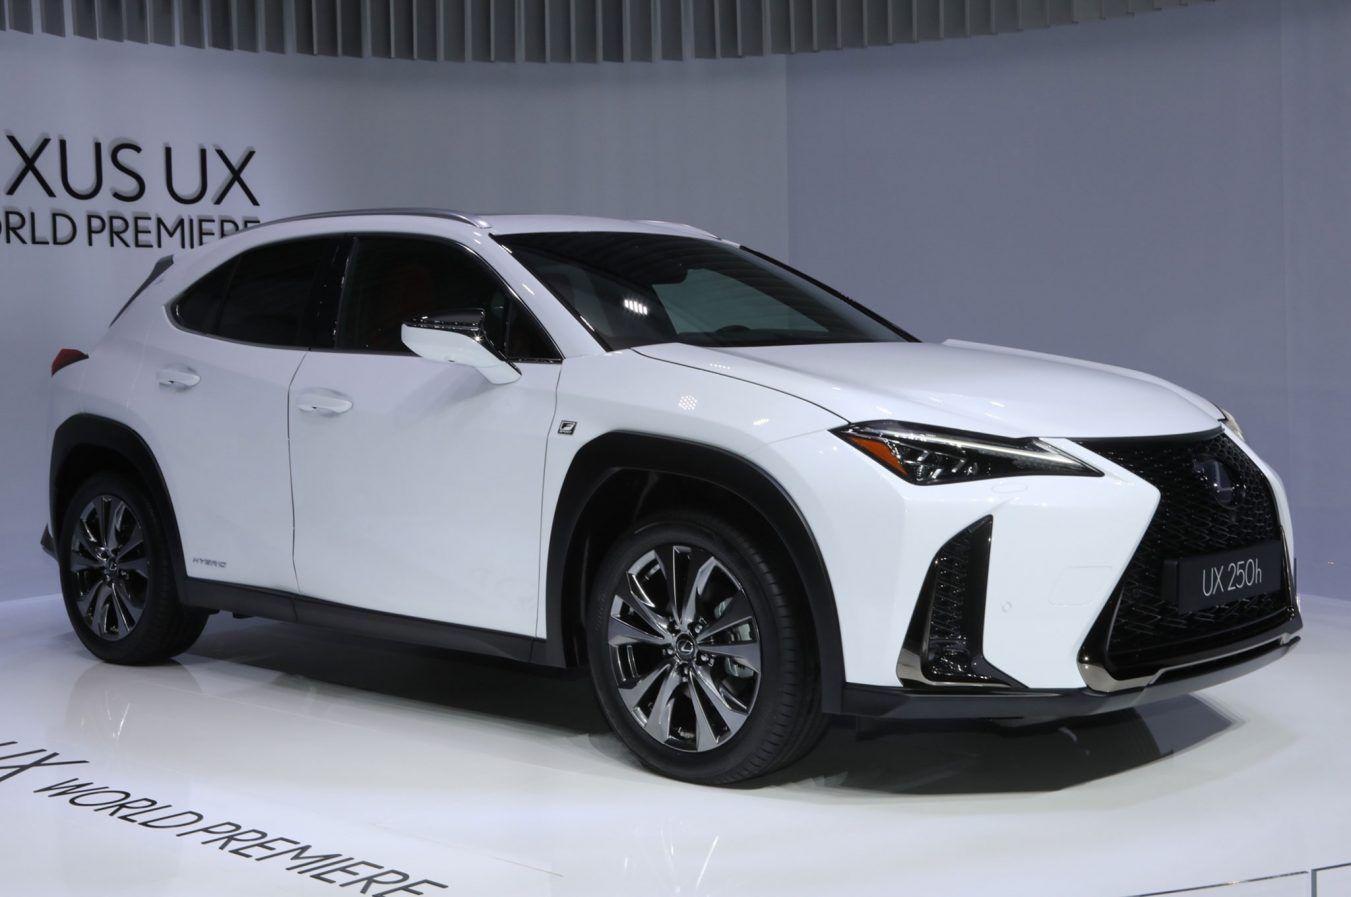 Lexus UX HD Wallpaper For Mobile Phone. New Cars Review and Photo